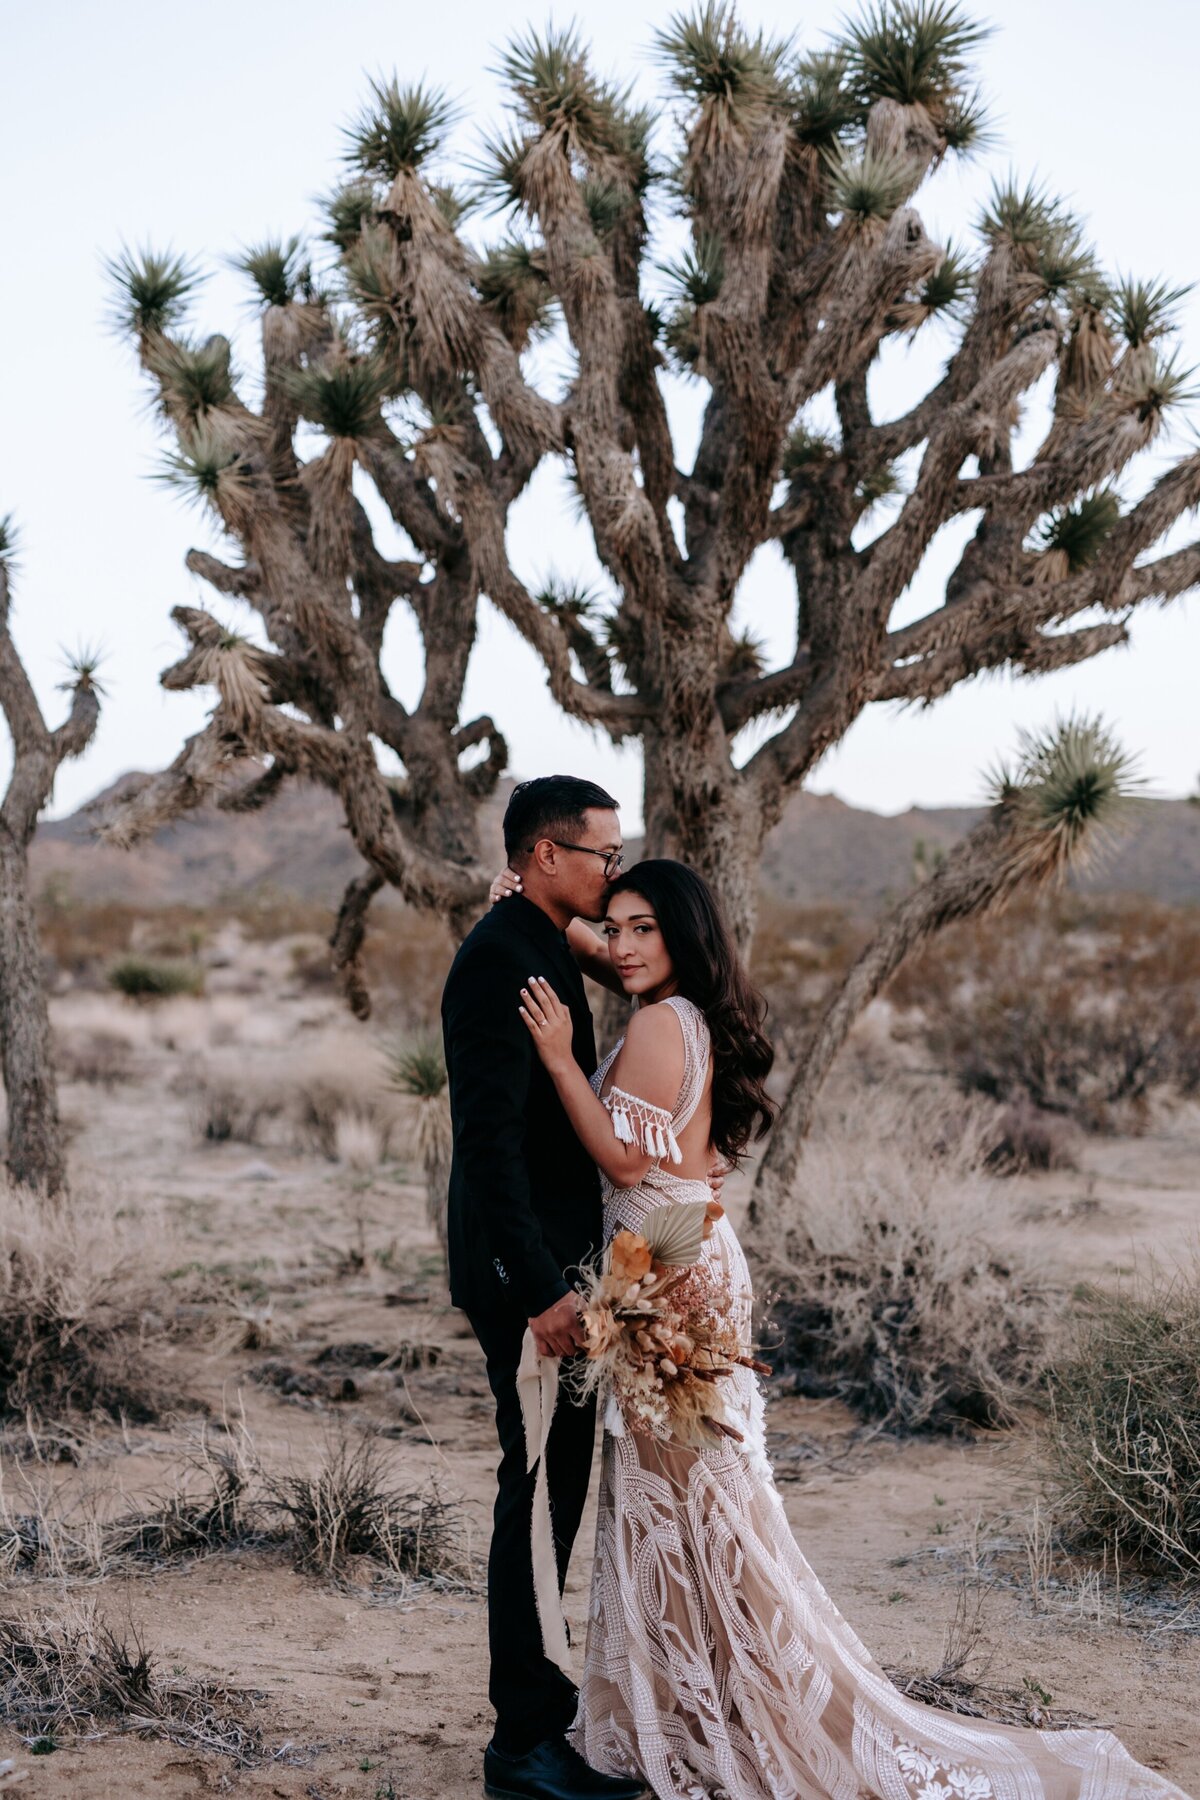 Bride and groom posing in front of a large cactus.